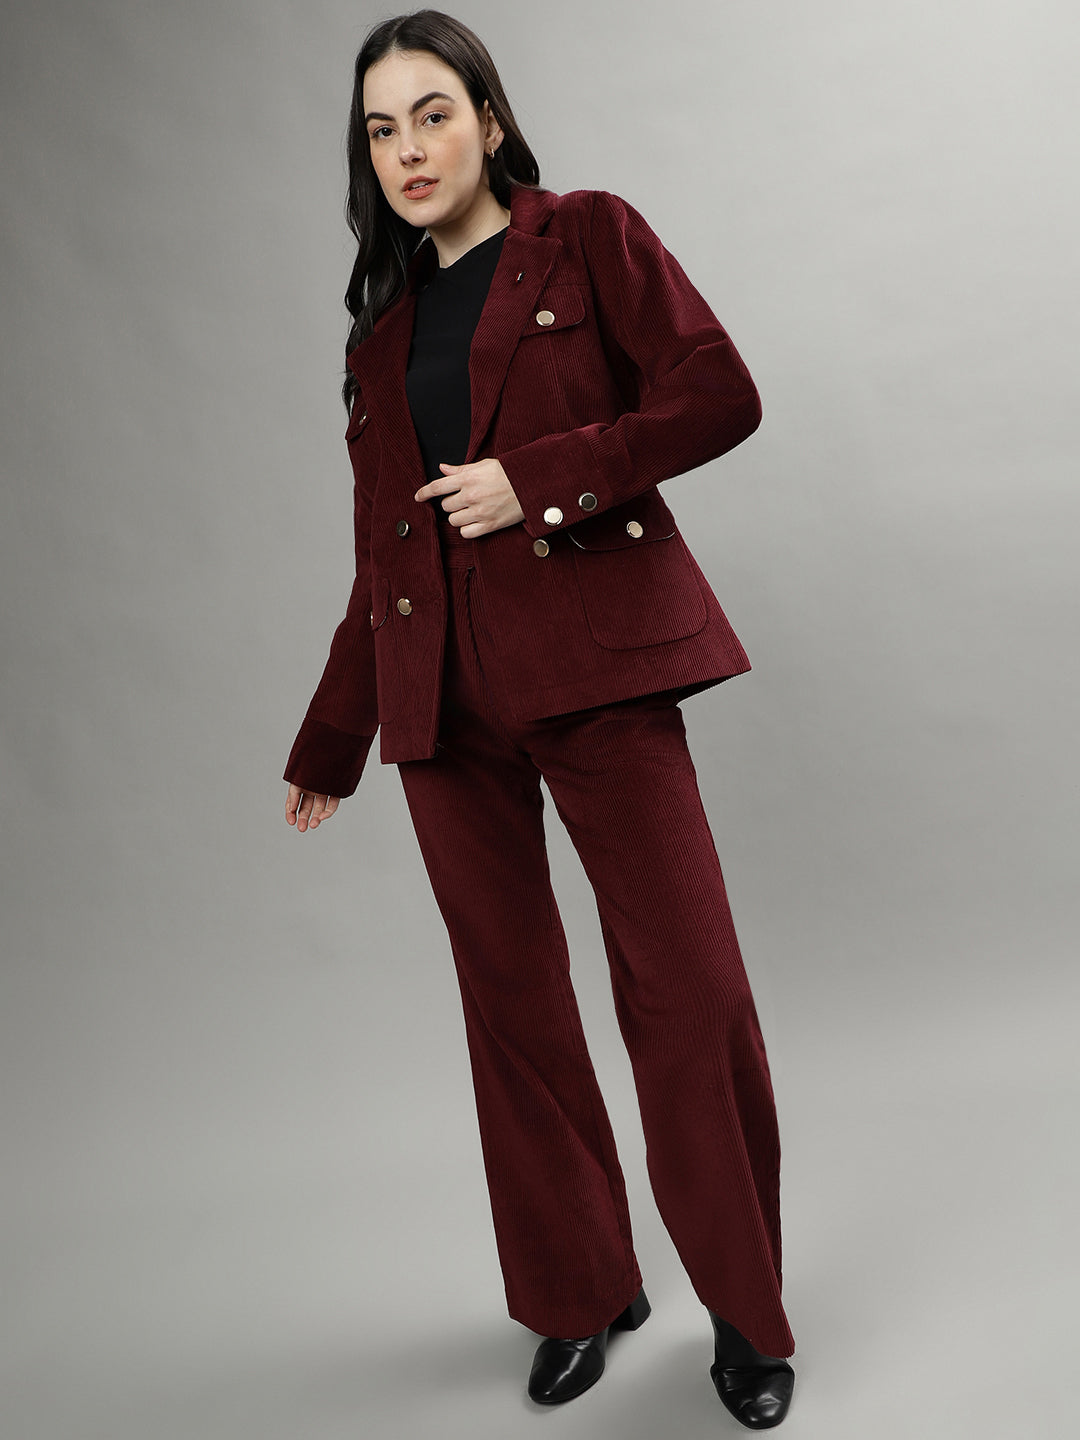 Iconic Women Wine Double-Breasted Notched Lapel Long Sleeves Blazer